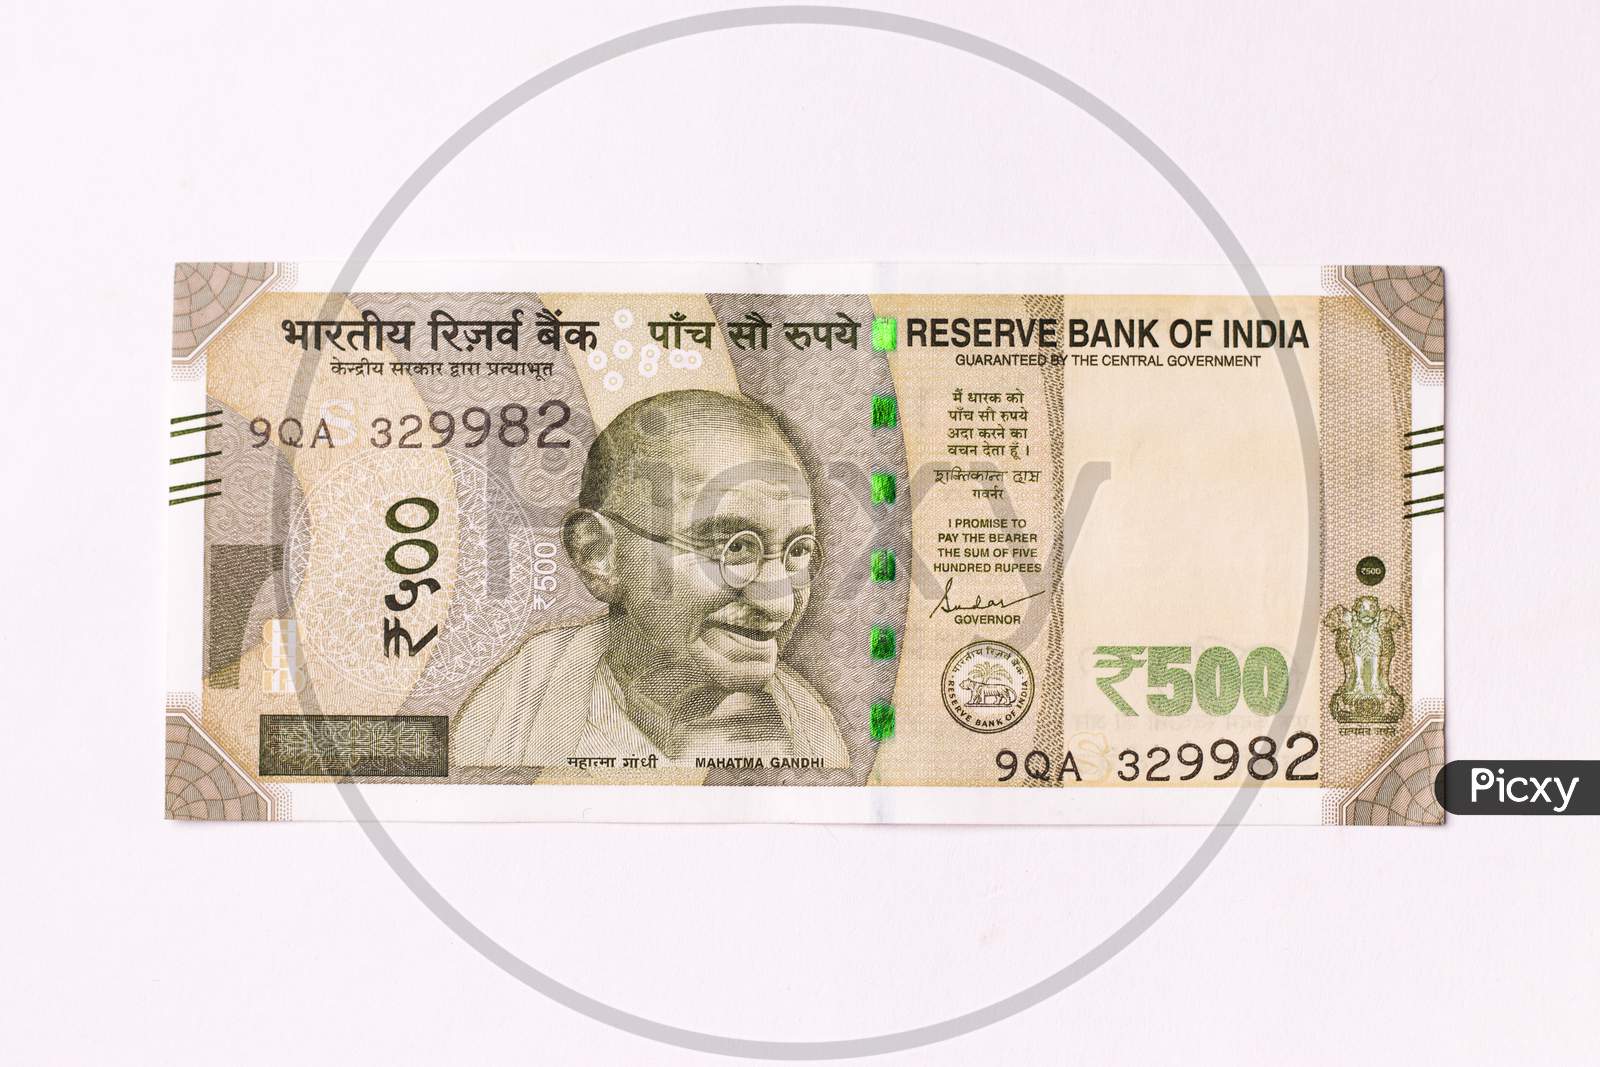 Assam, india - March 30, 2021 : Indian new 500 Rupees note stock image.